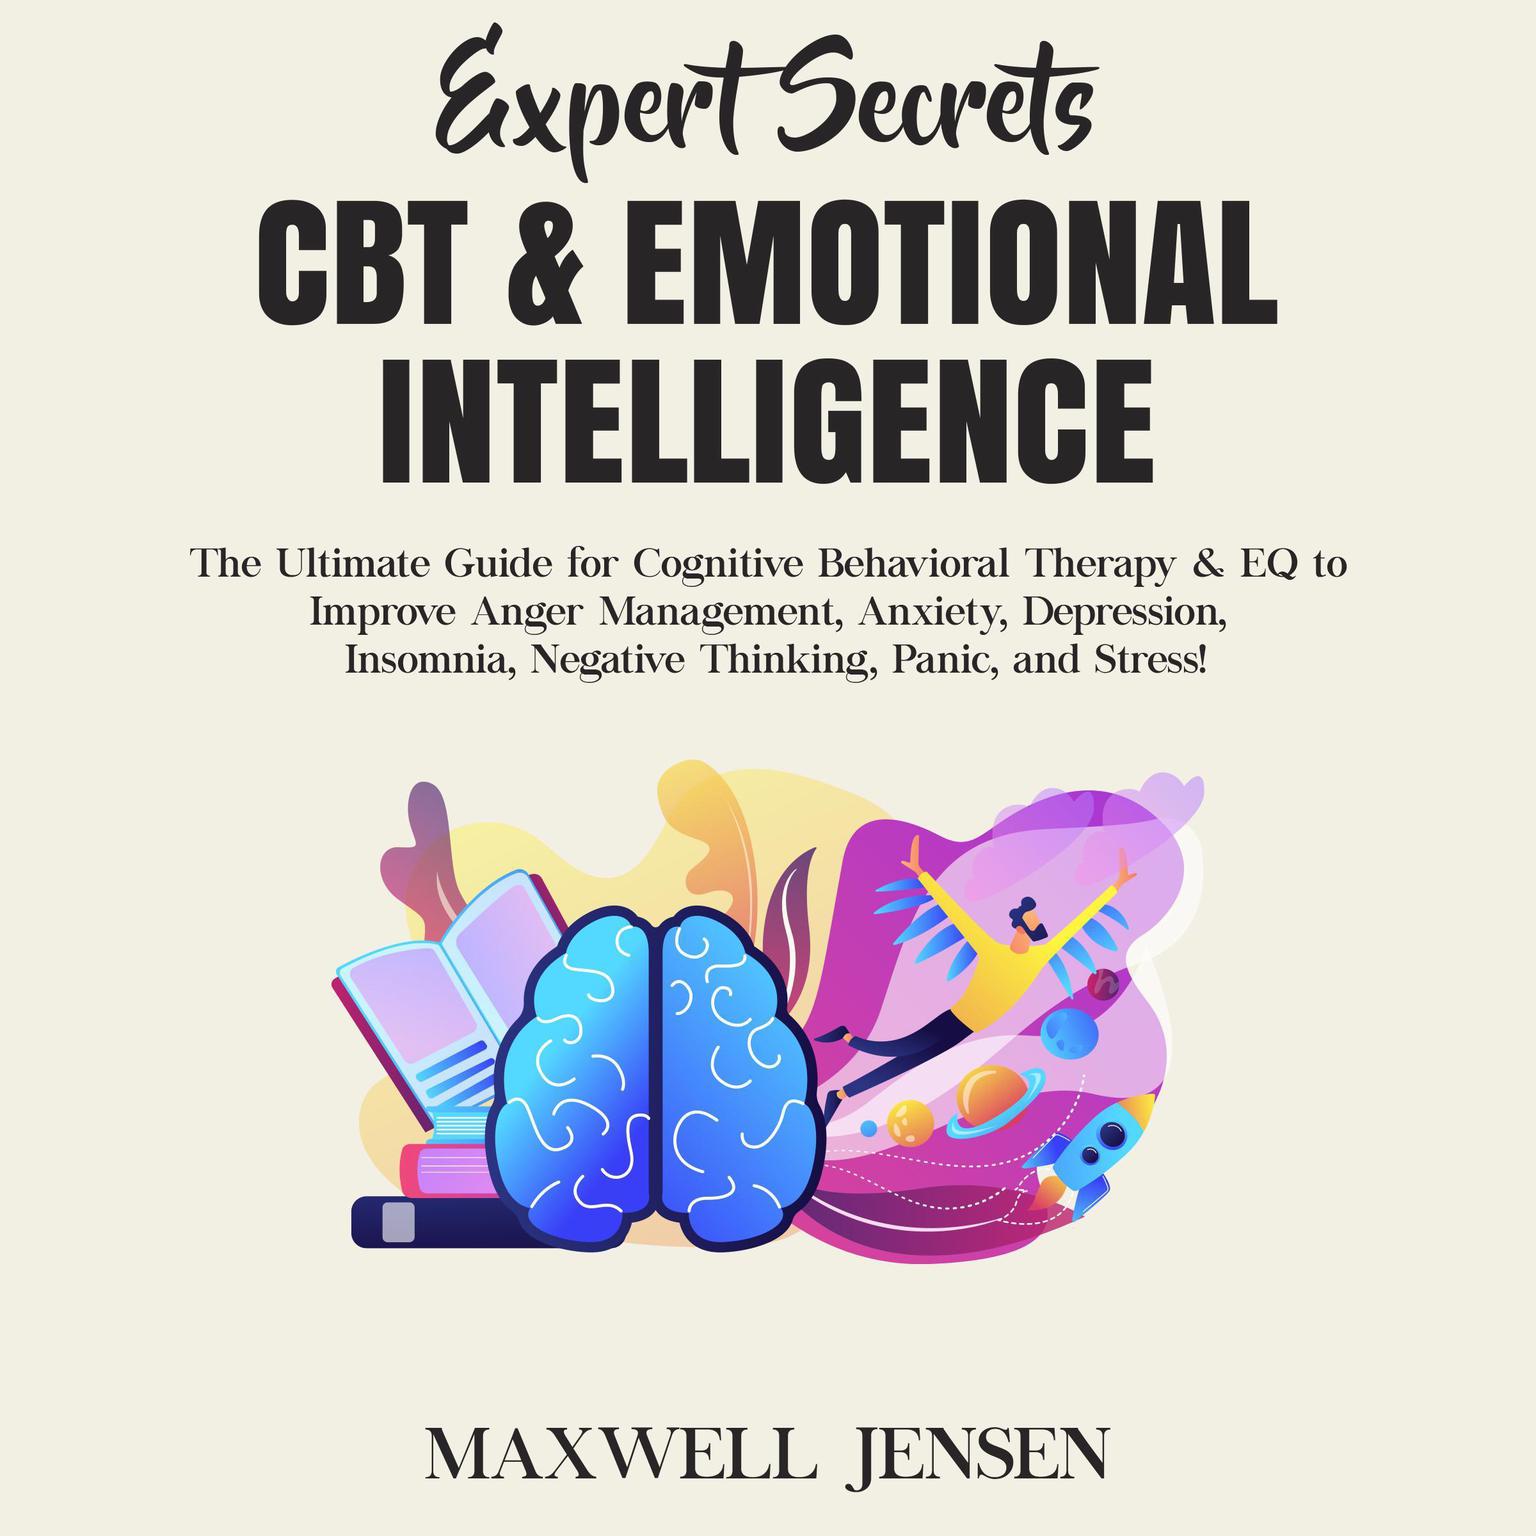 Expert Secrets – CBT & Emotional Intelligence: The Ultimate Guide for Cognitive Behavioral Therapy & EQ to Improve Anger Management, Anxiety, Depression, Insomnia, Negative Thinking, Panic, and Stress Audiobook, by Maxwell Jensen